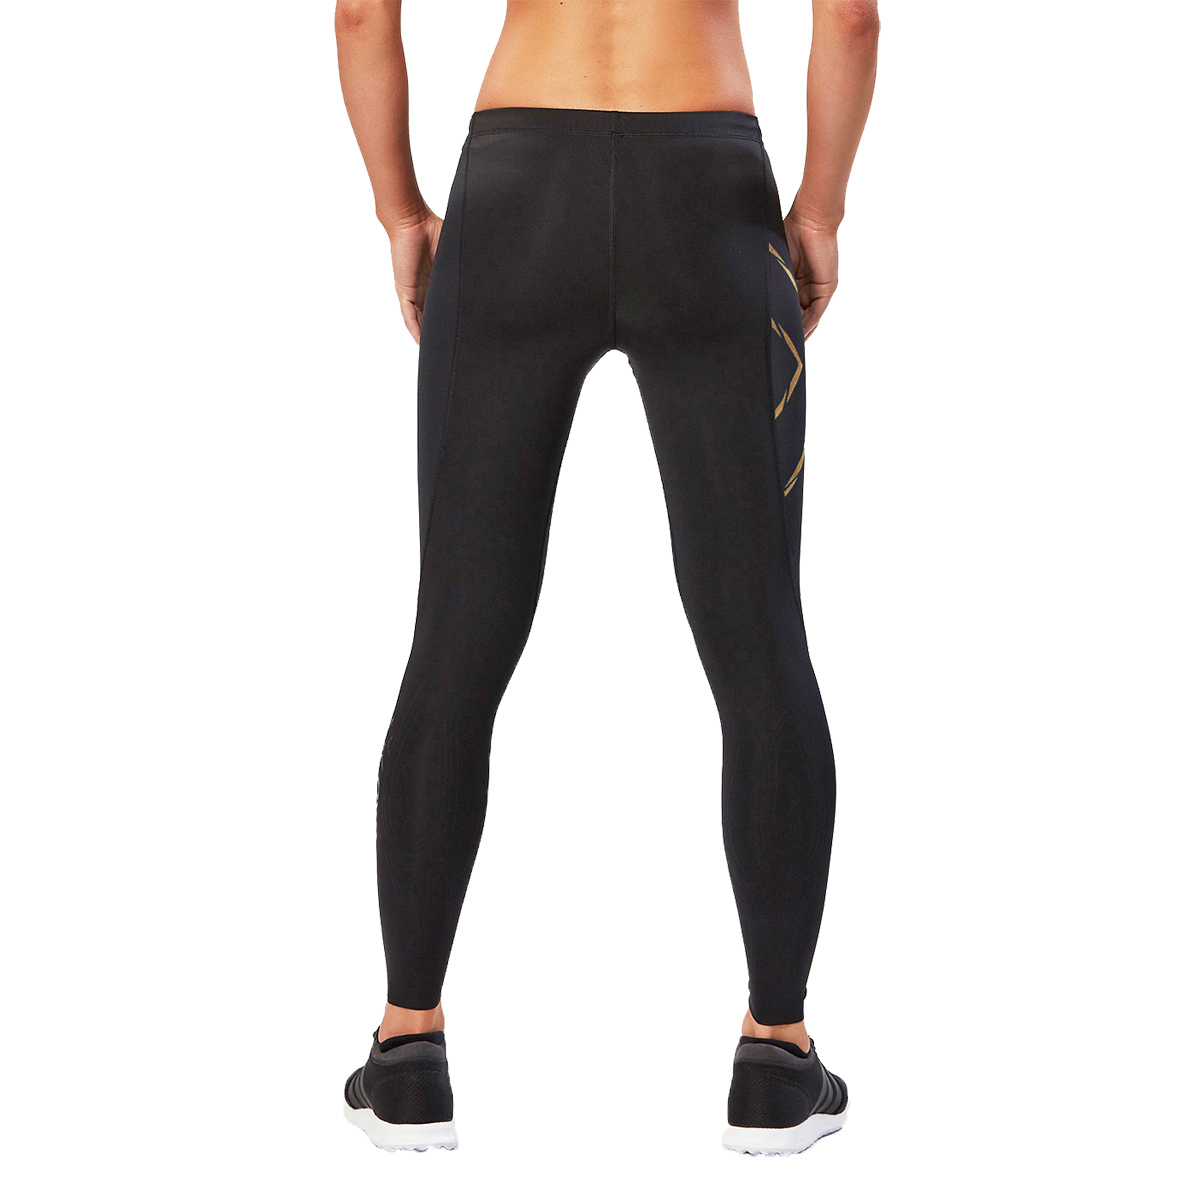 2XU MCS Elite Compression Tight, , large image number null